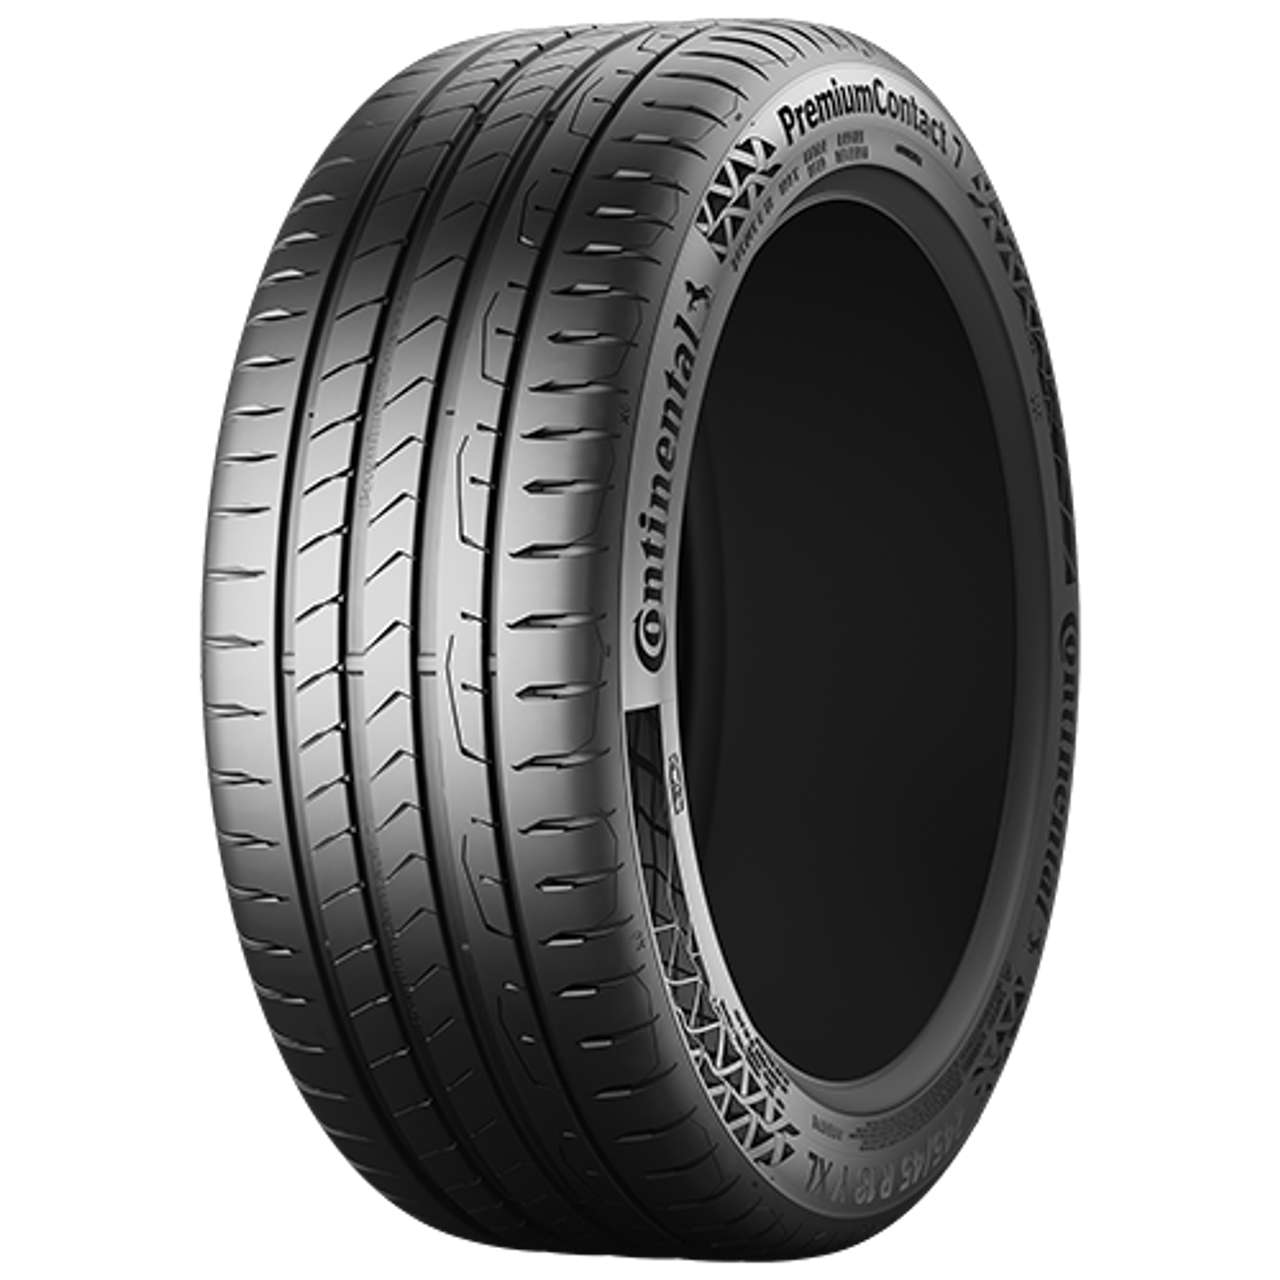 CONTINENTAL PREMIUMCONTACT 7 235/40R18 95Y FR BSW